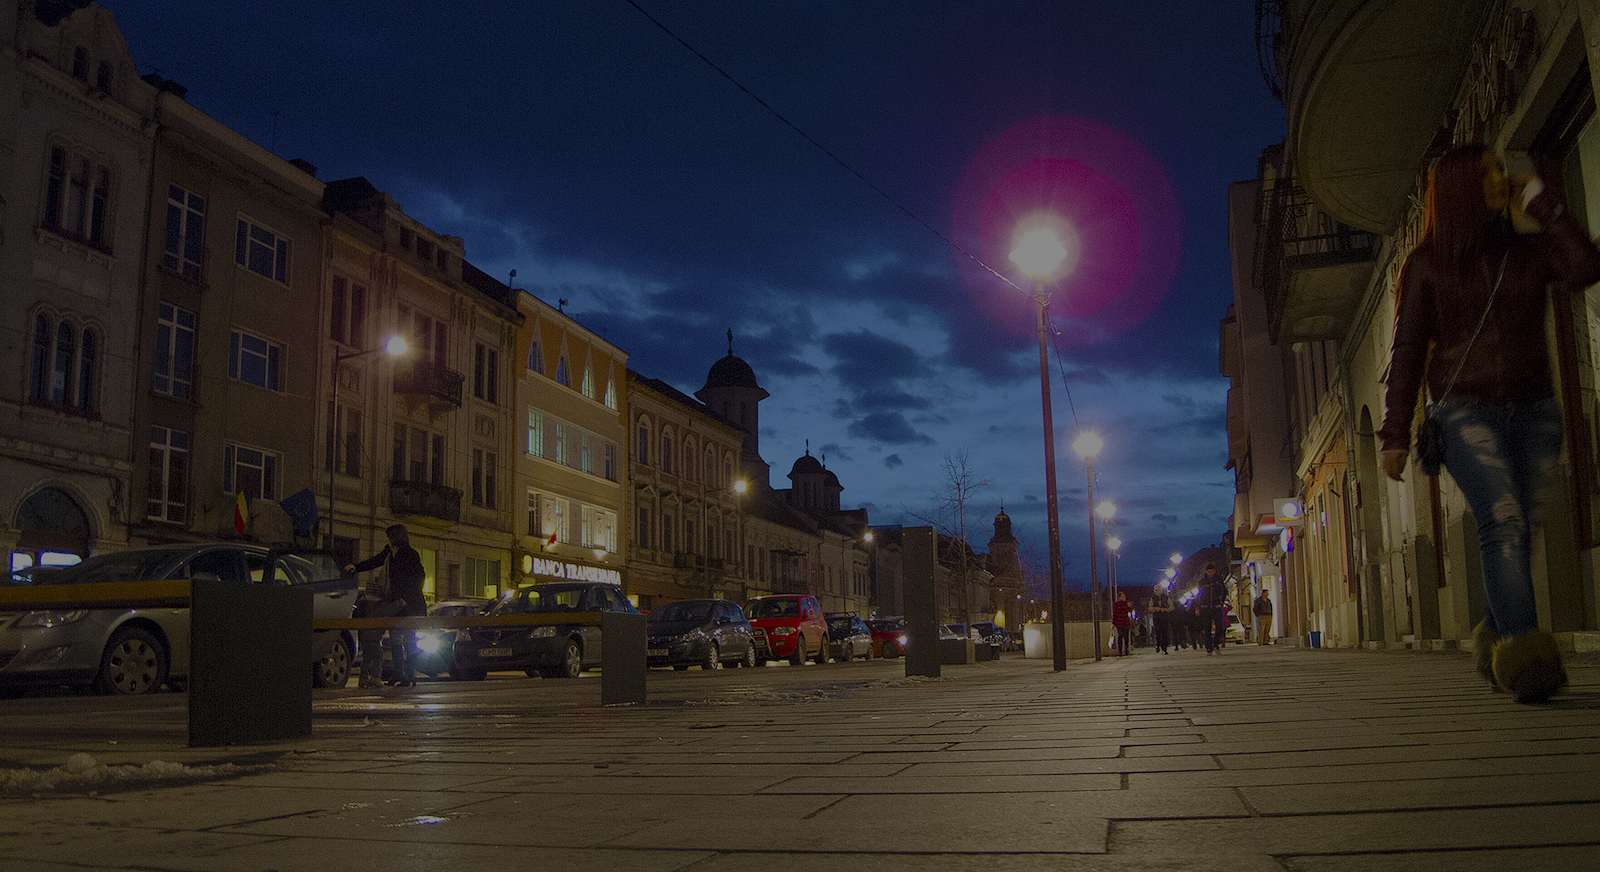 Eroilor Bv, Cluj,by night